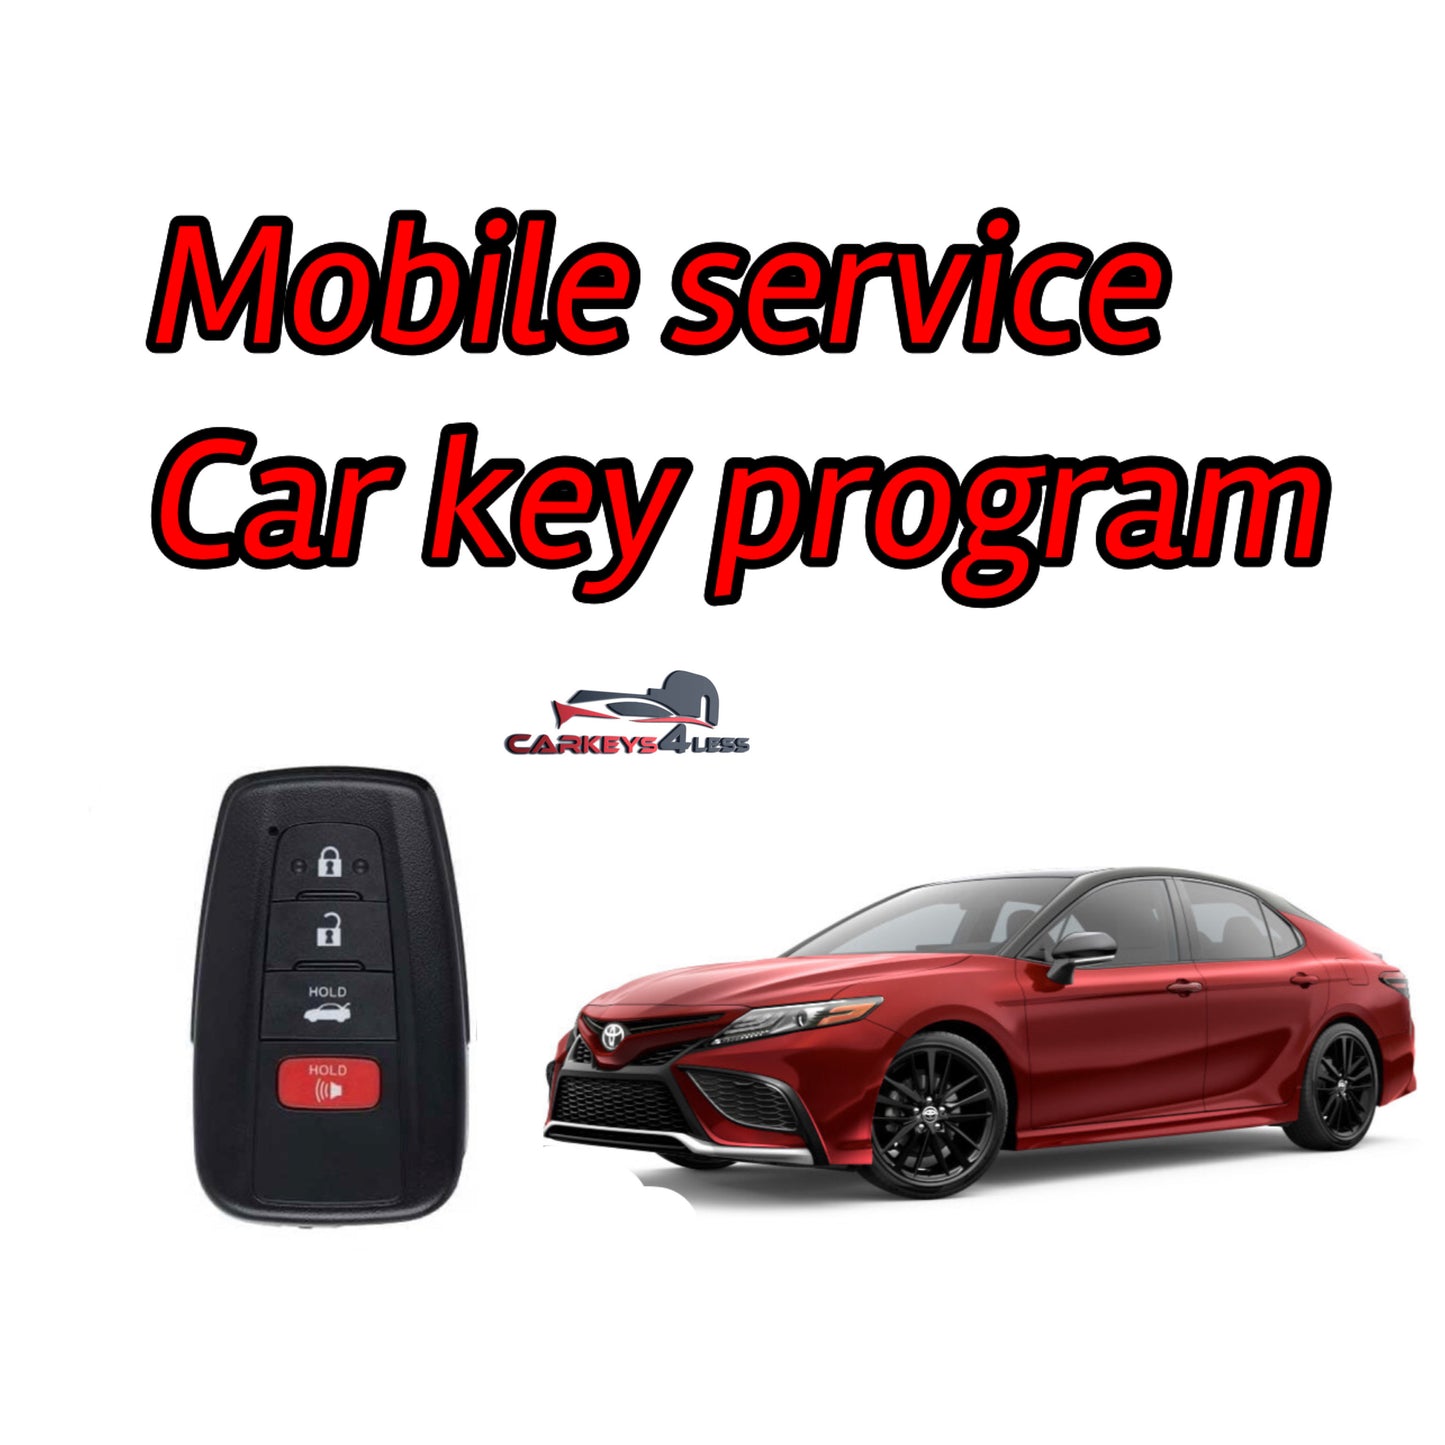 Mobile service for a new oem  toyota car key replacement